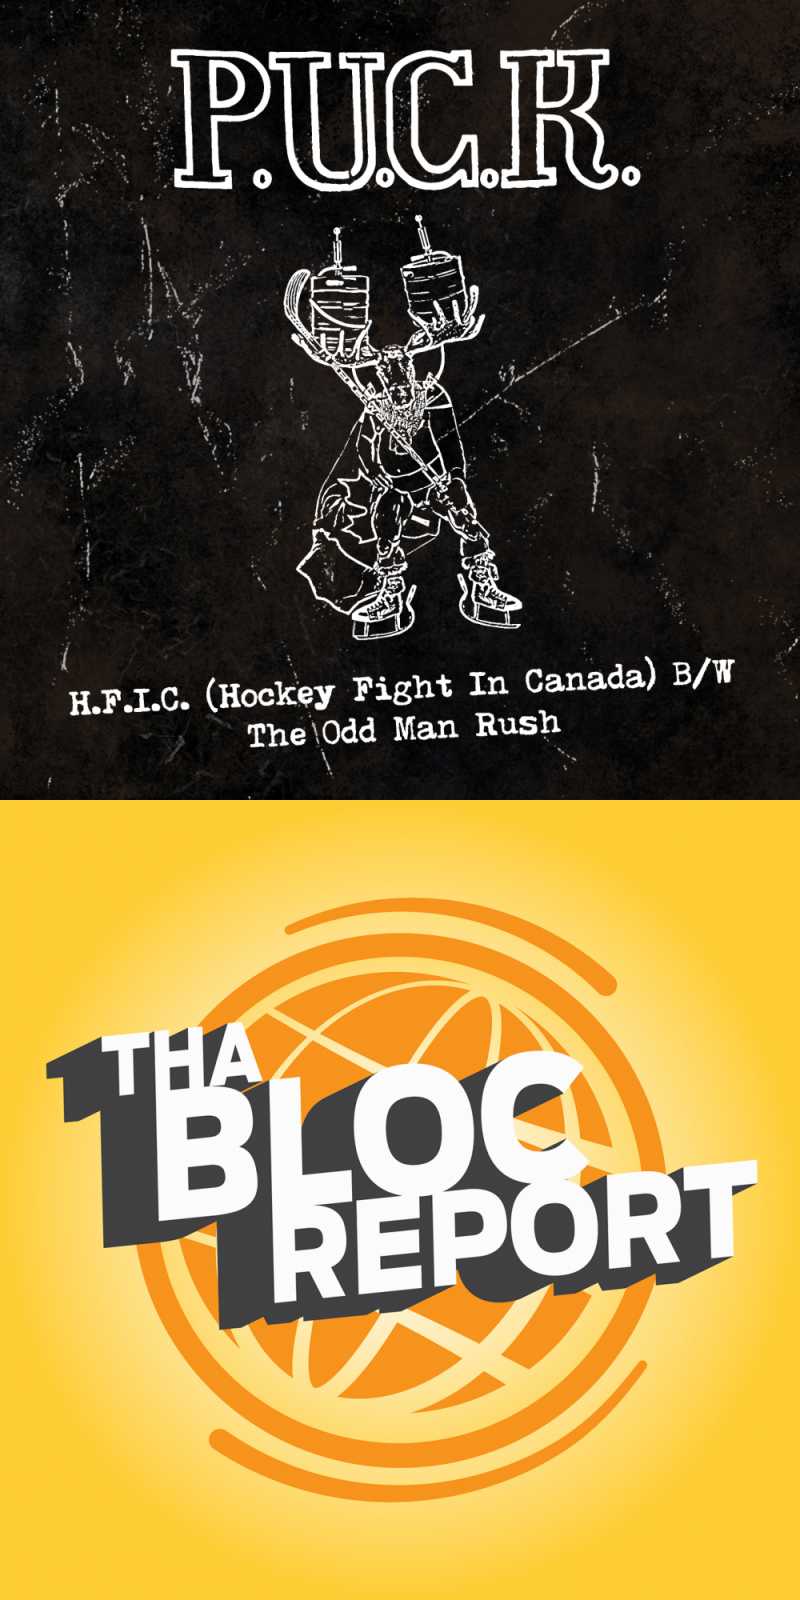 Covers of “H.F.I.C. (Hockey Fight In Canada) B/W The Odd Man Rush” by P.U.C.K. and The Netlabel Day Crate Dig Episode of Tha Bloc Report hosted by Pot-C